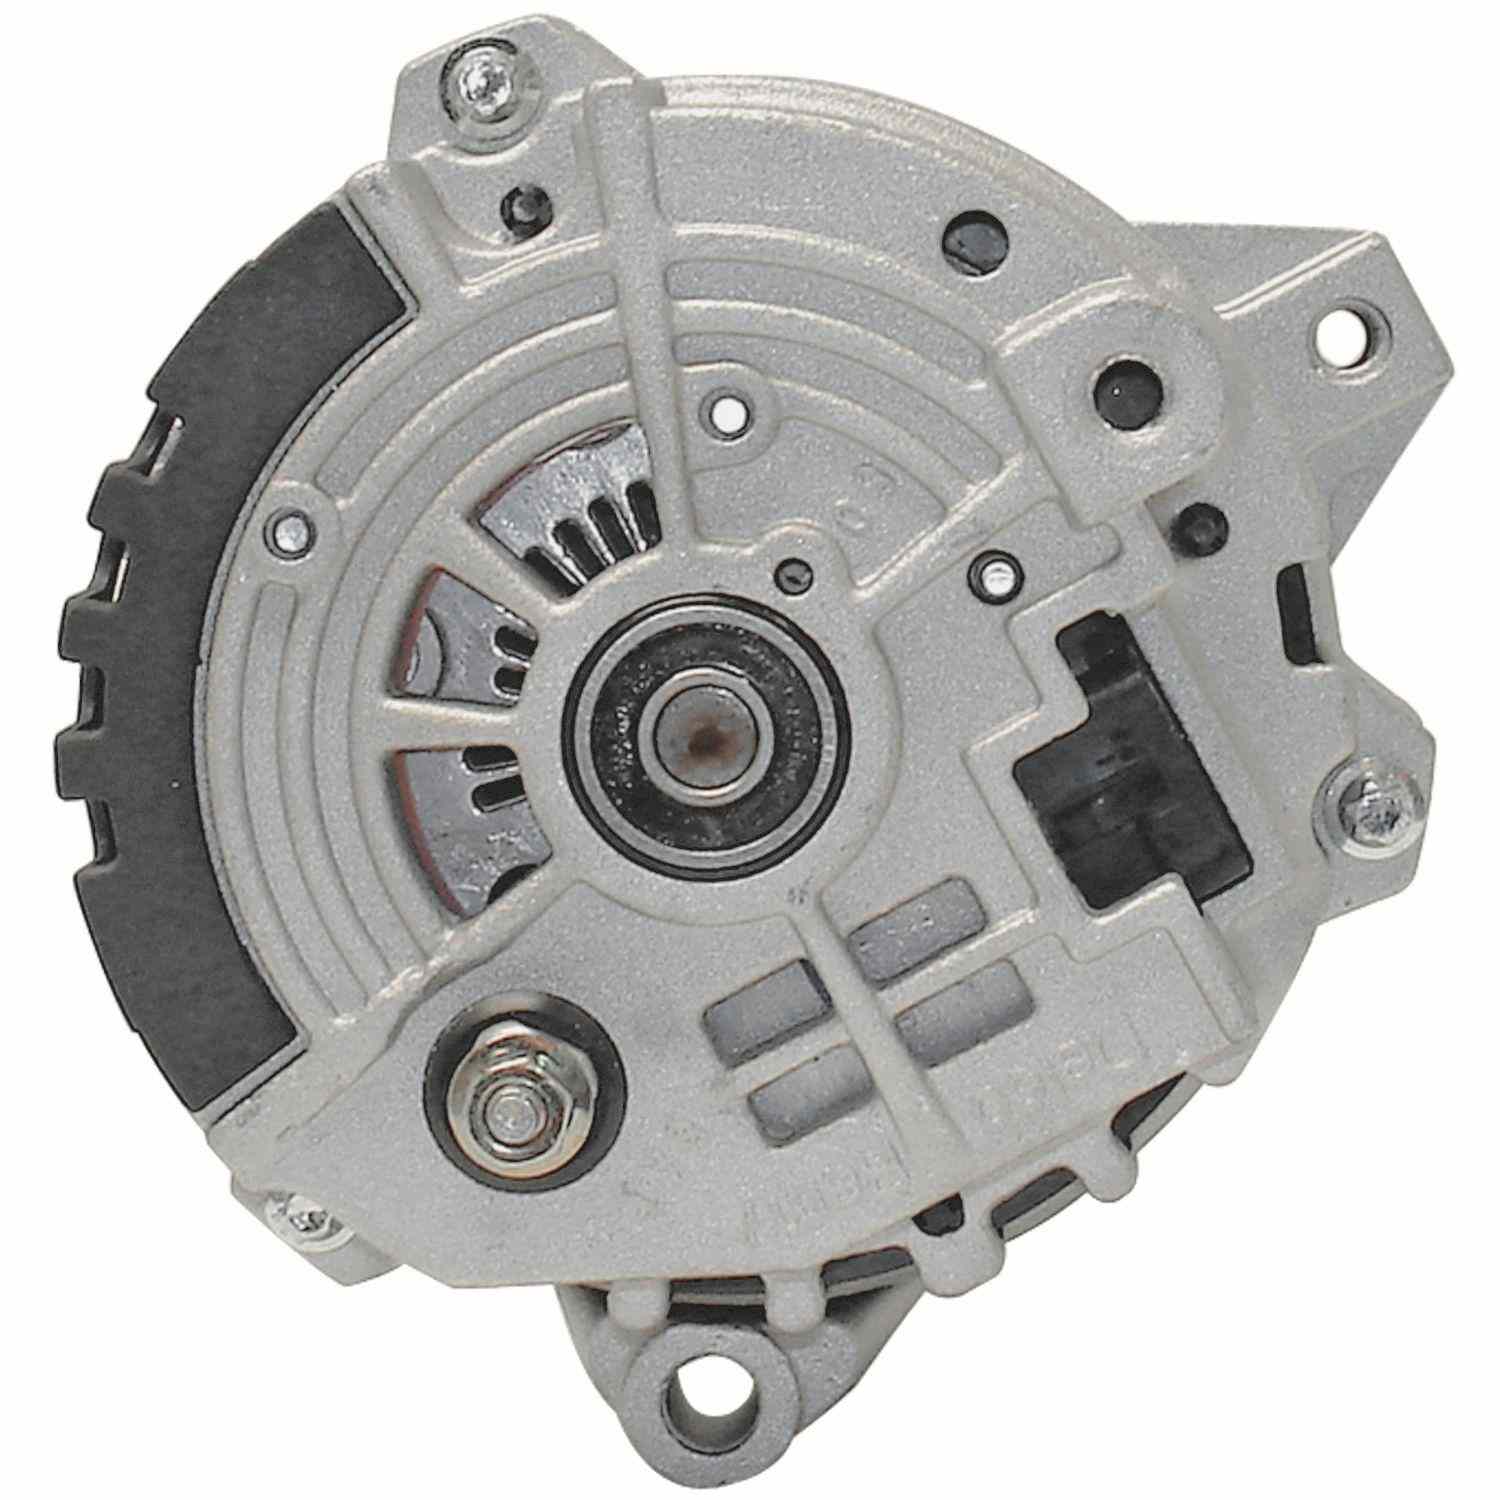 ACDELCO GOLD/PROFESSIONAL - Reman Alternator - DCC 334-2405A